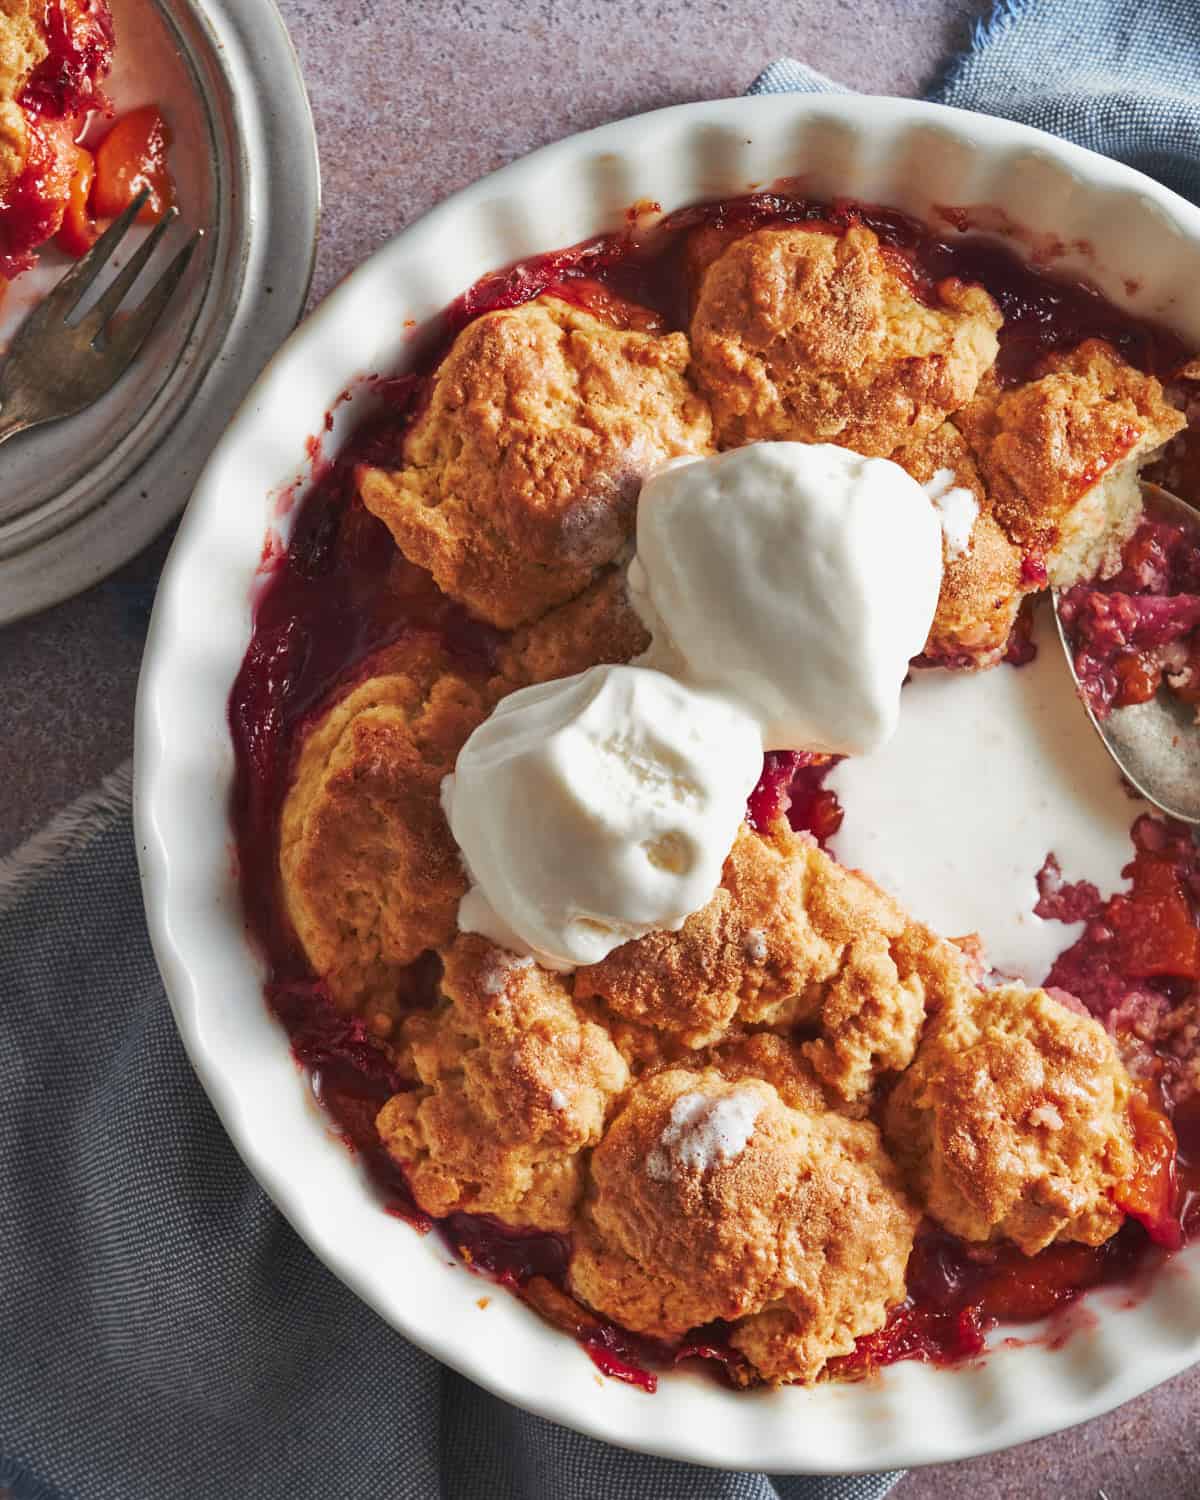 Peaches and Raspberries Cobbler in a baking tray. It shown all fruit baked inside. It is served with some ice-cream